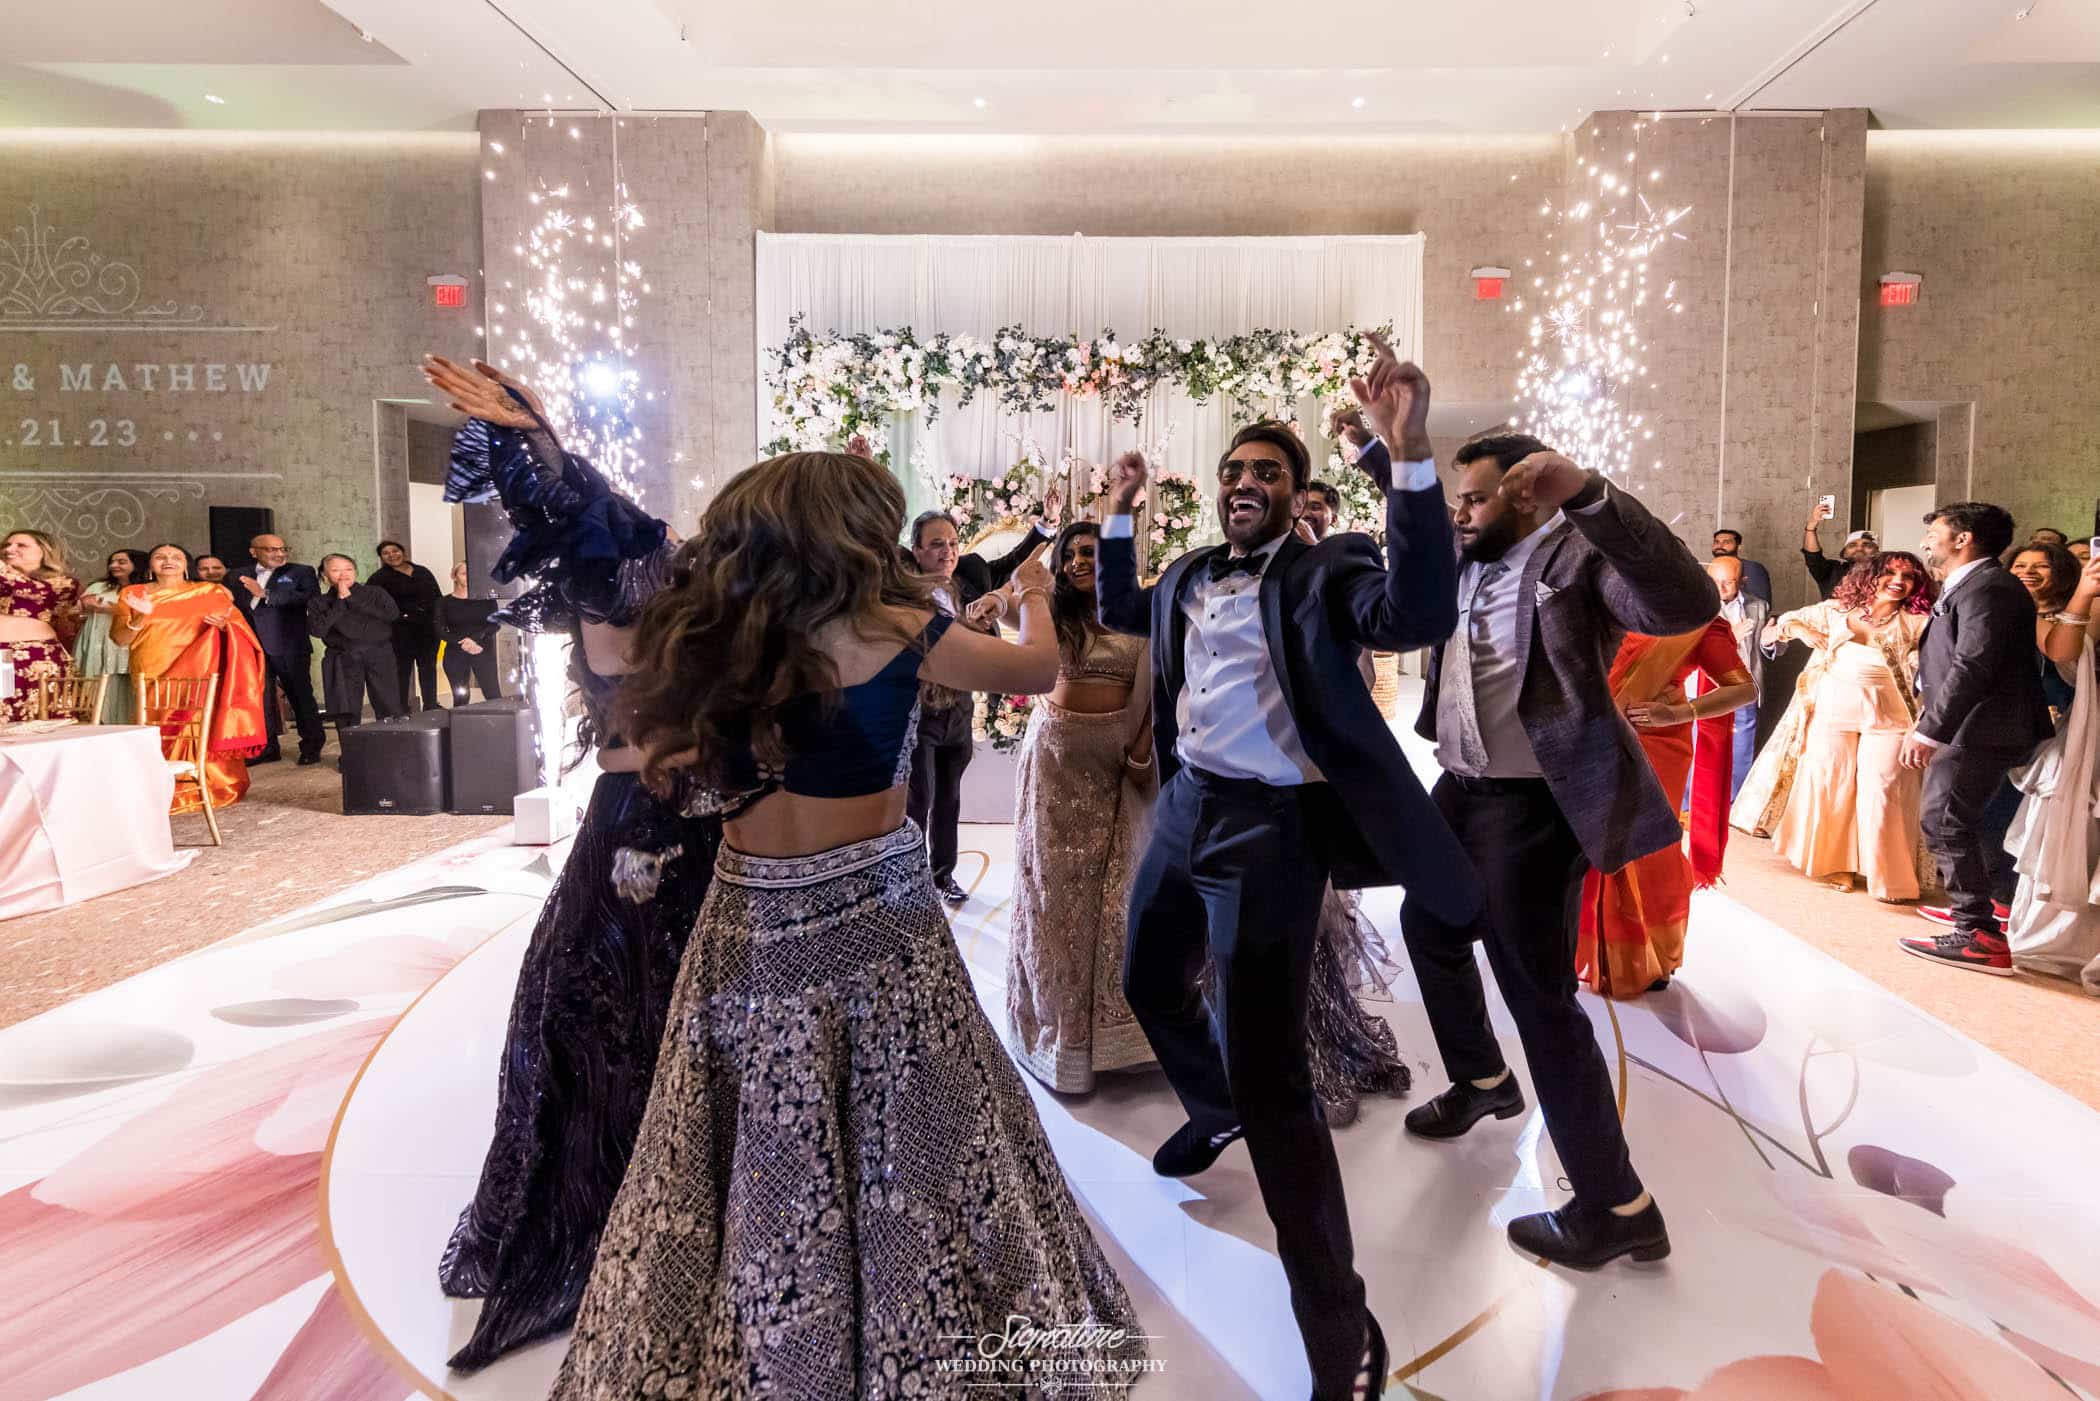 Bride and groom dancing with wedding guests